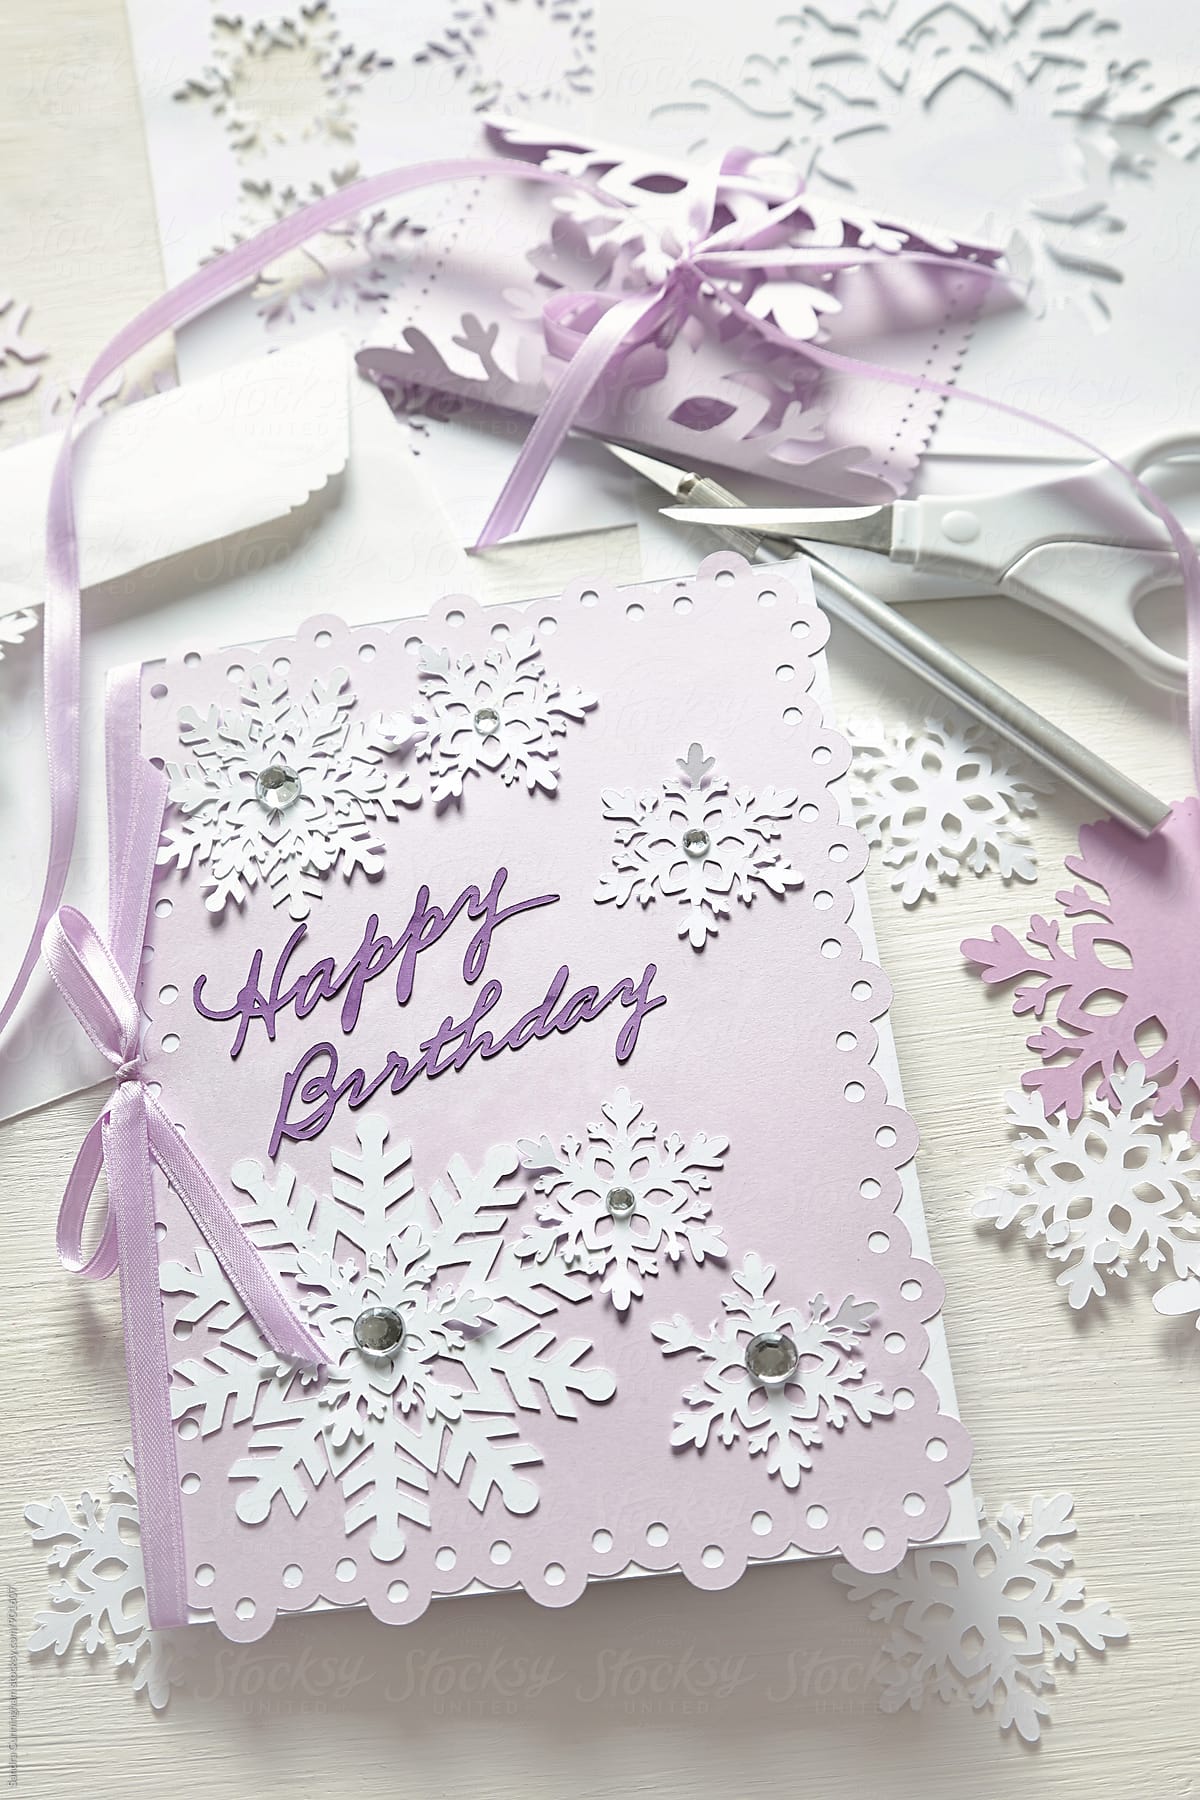 Closeup of a handmade birthday card with snowflakes